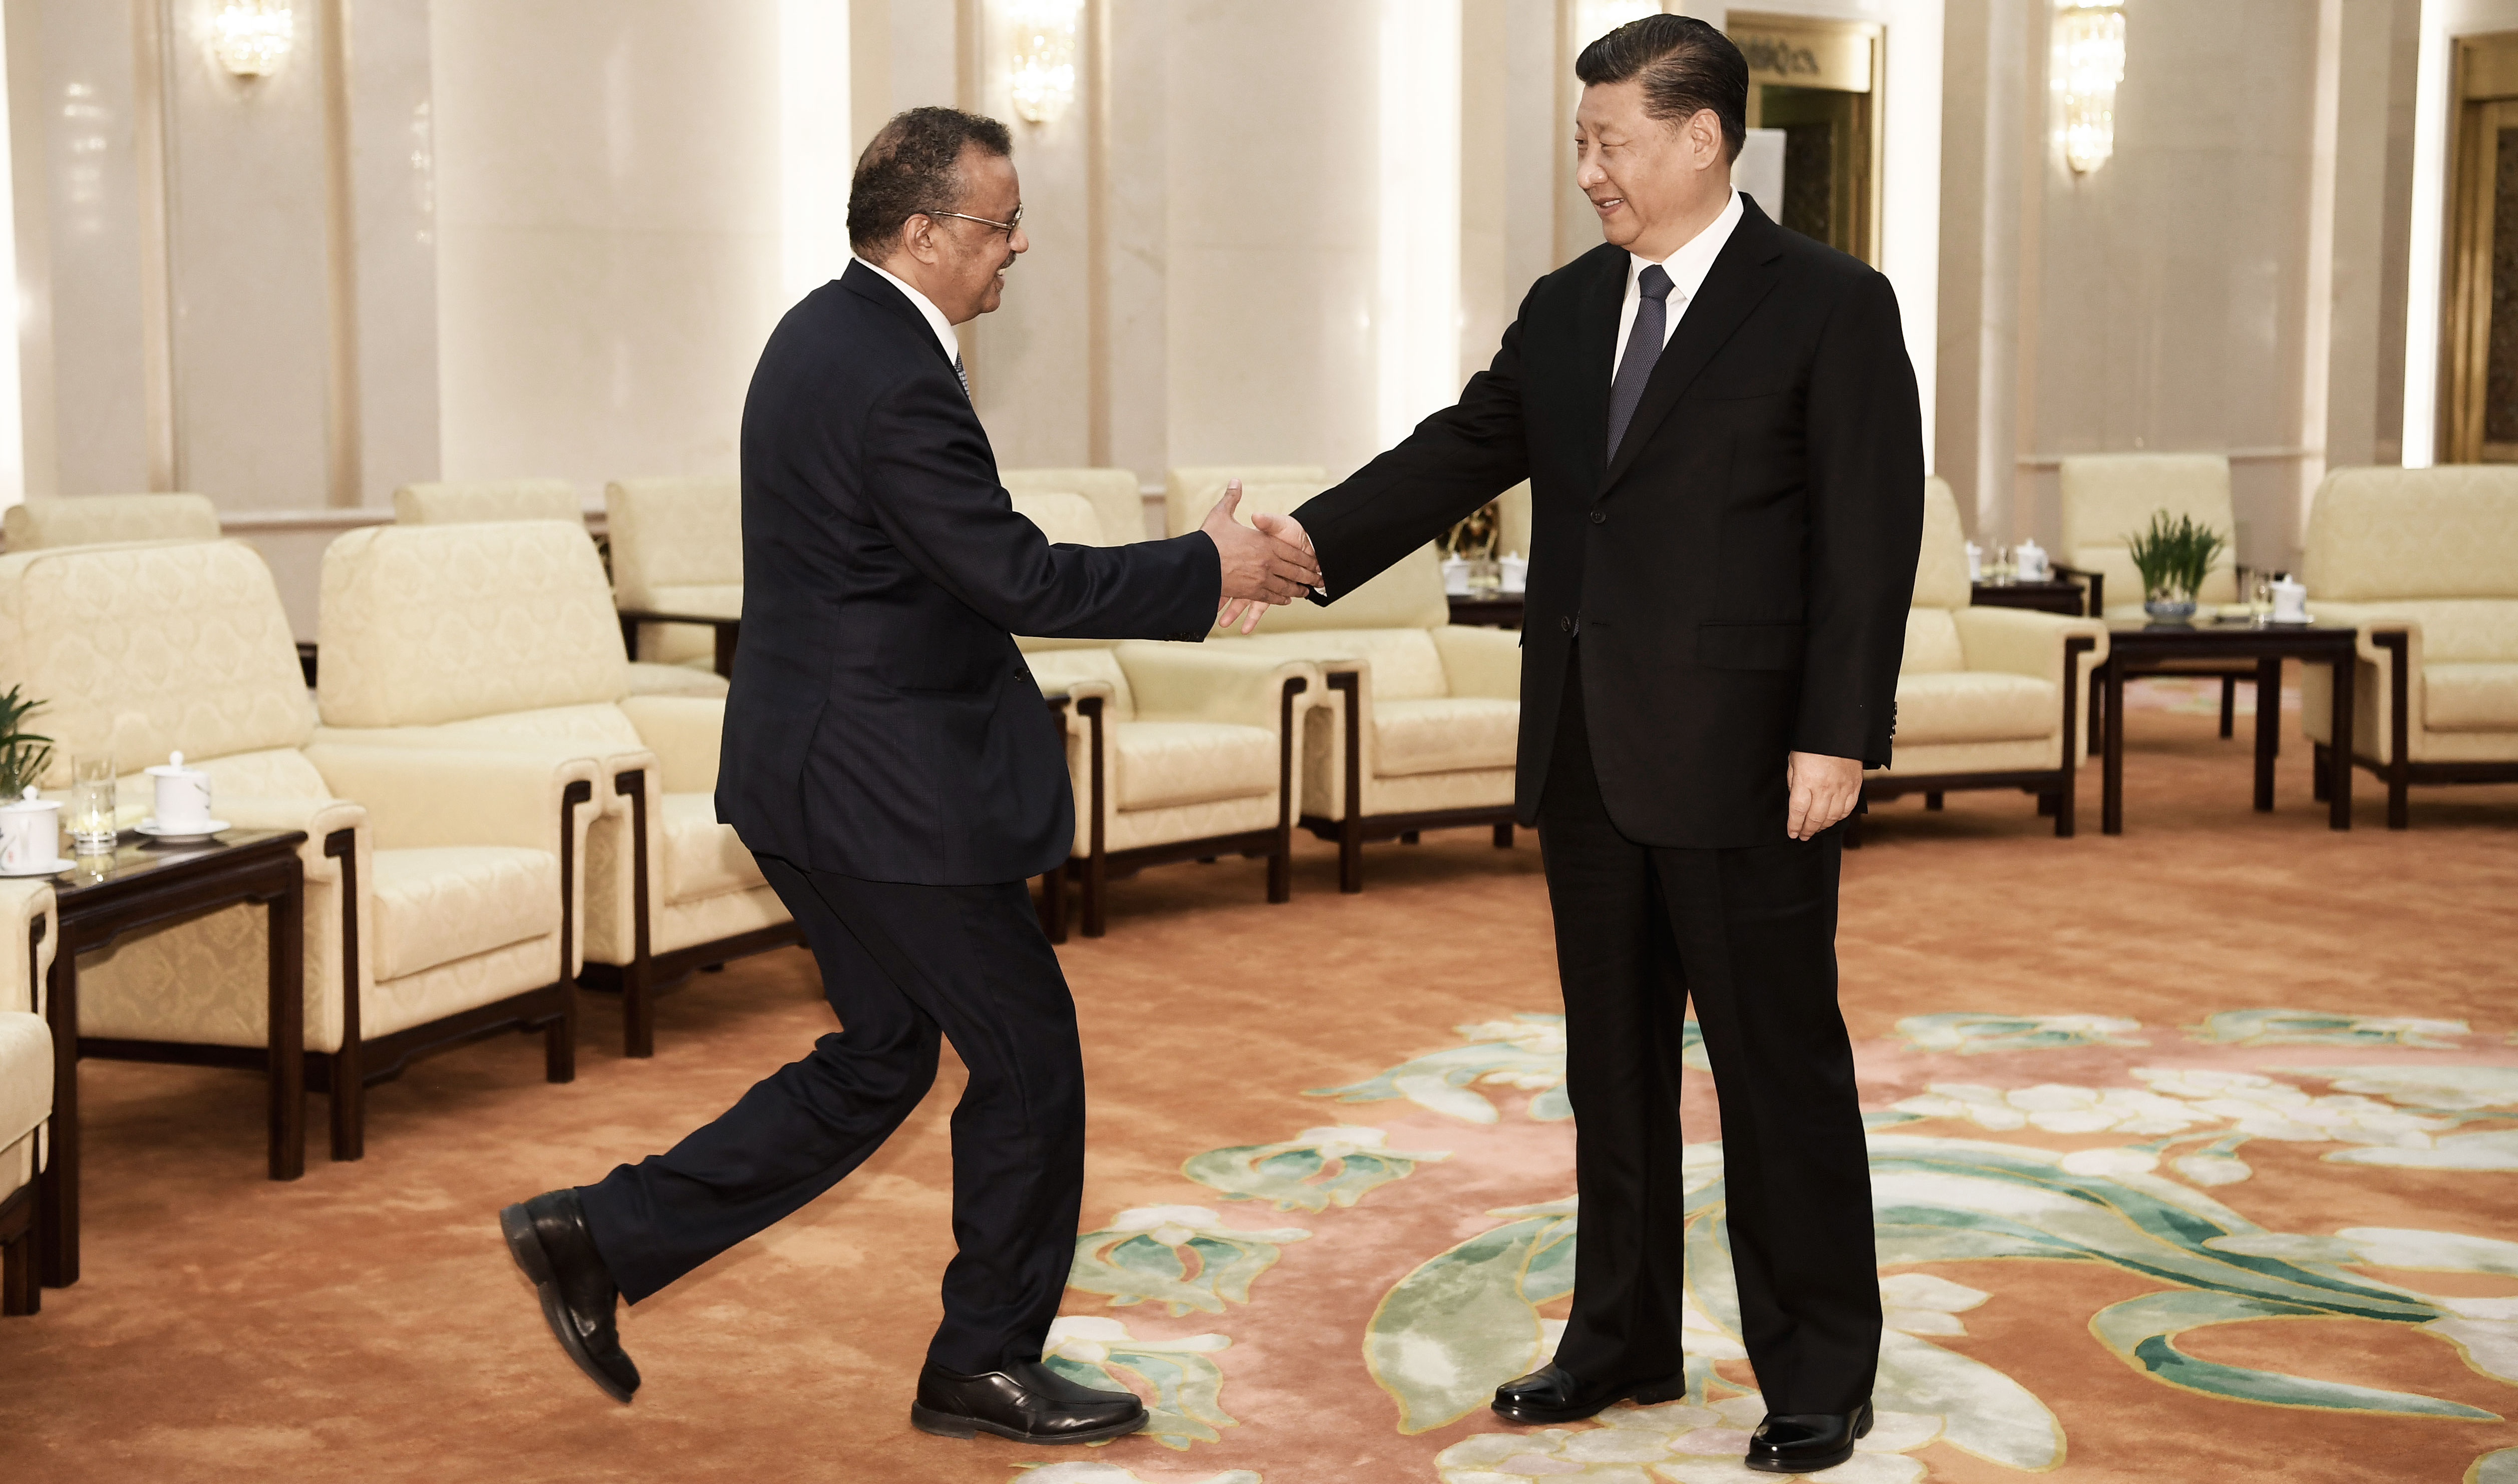 Dr. Tedros Adhanom Ghebreyesus, director-general of the World Health Organisation, and President Xi Jingping of China